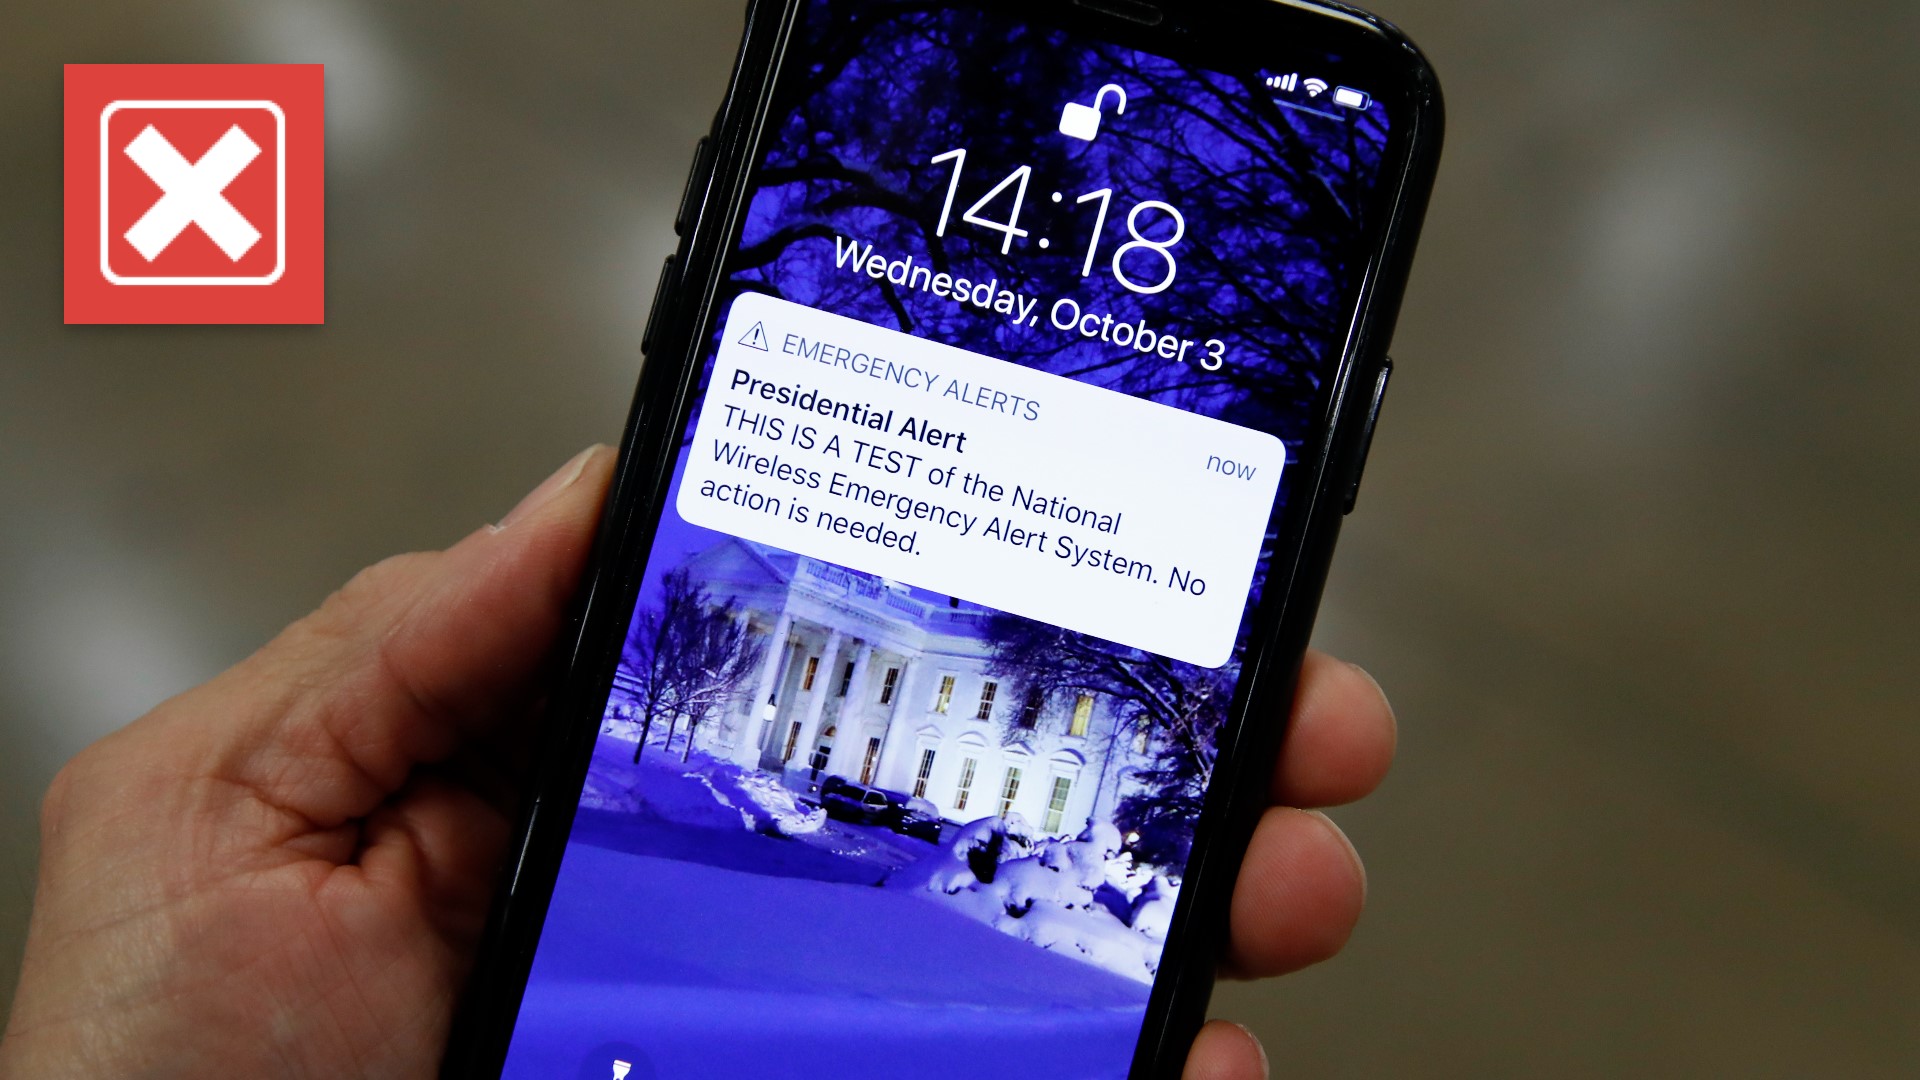 Phone service providers allow customers to turn on and off most emergency alerts. Most alerts are on by default, but tests of those alerts are off by default.